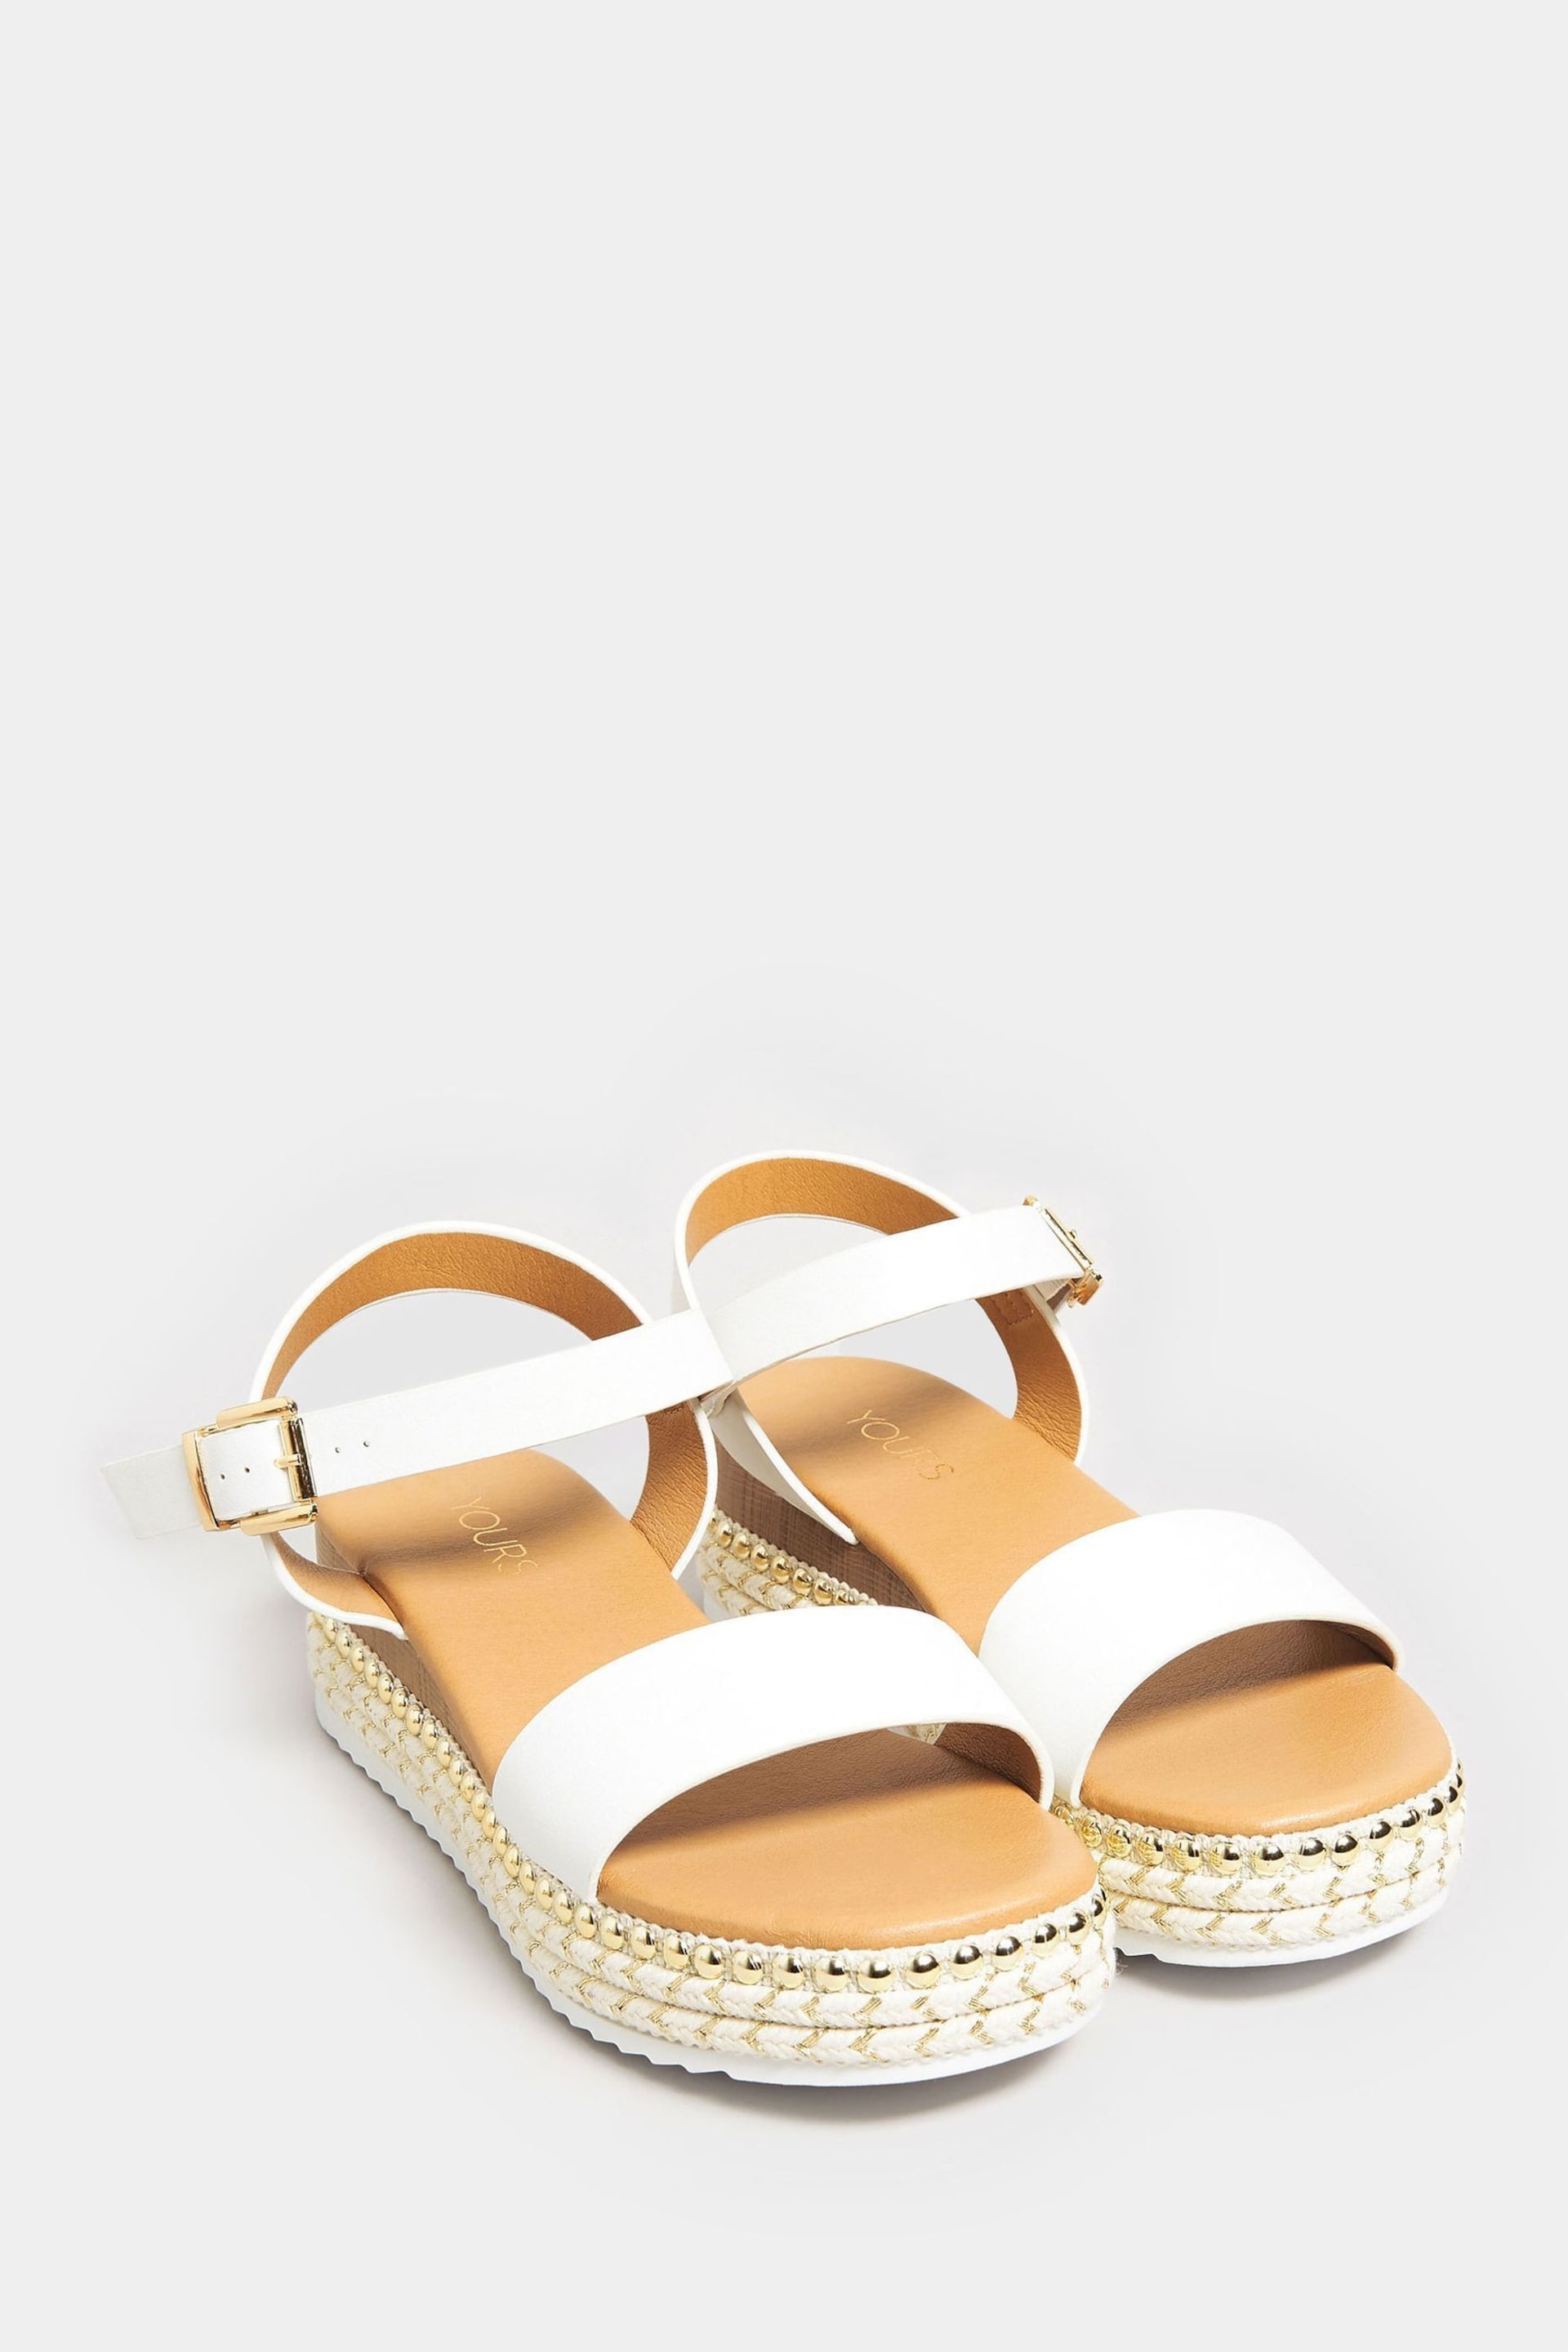 Yours Curve White Brown Extra Wide Fit Wide Fit Diamante Flower Sandals - Image 3 of 6